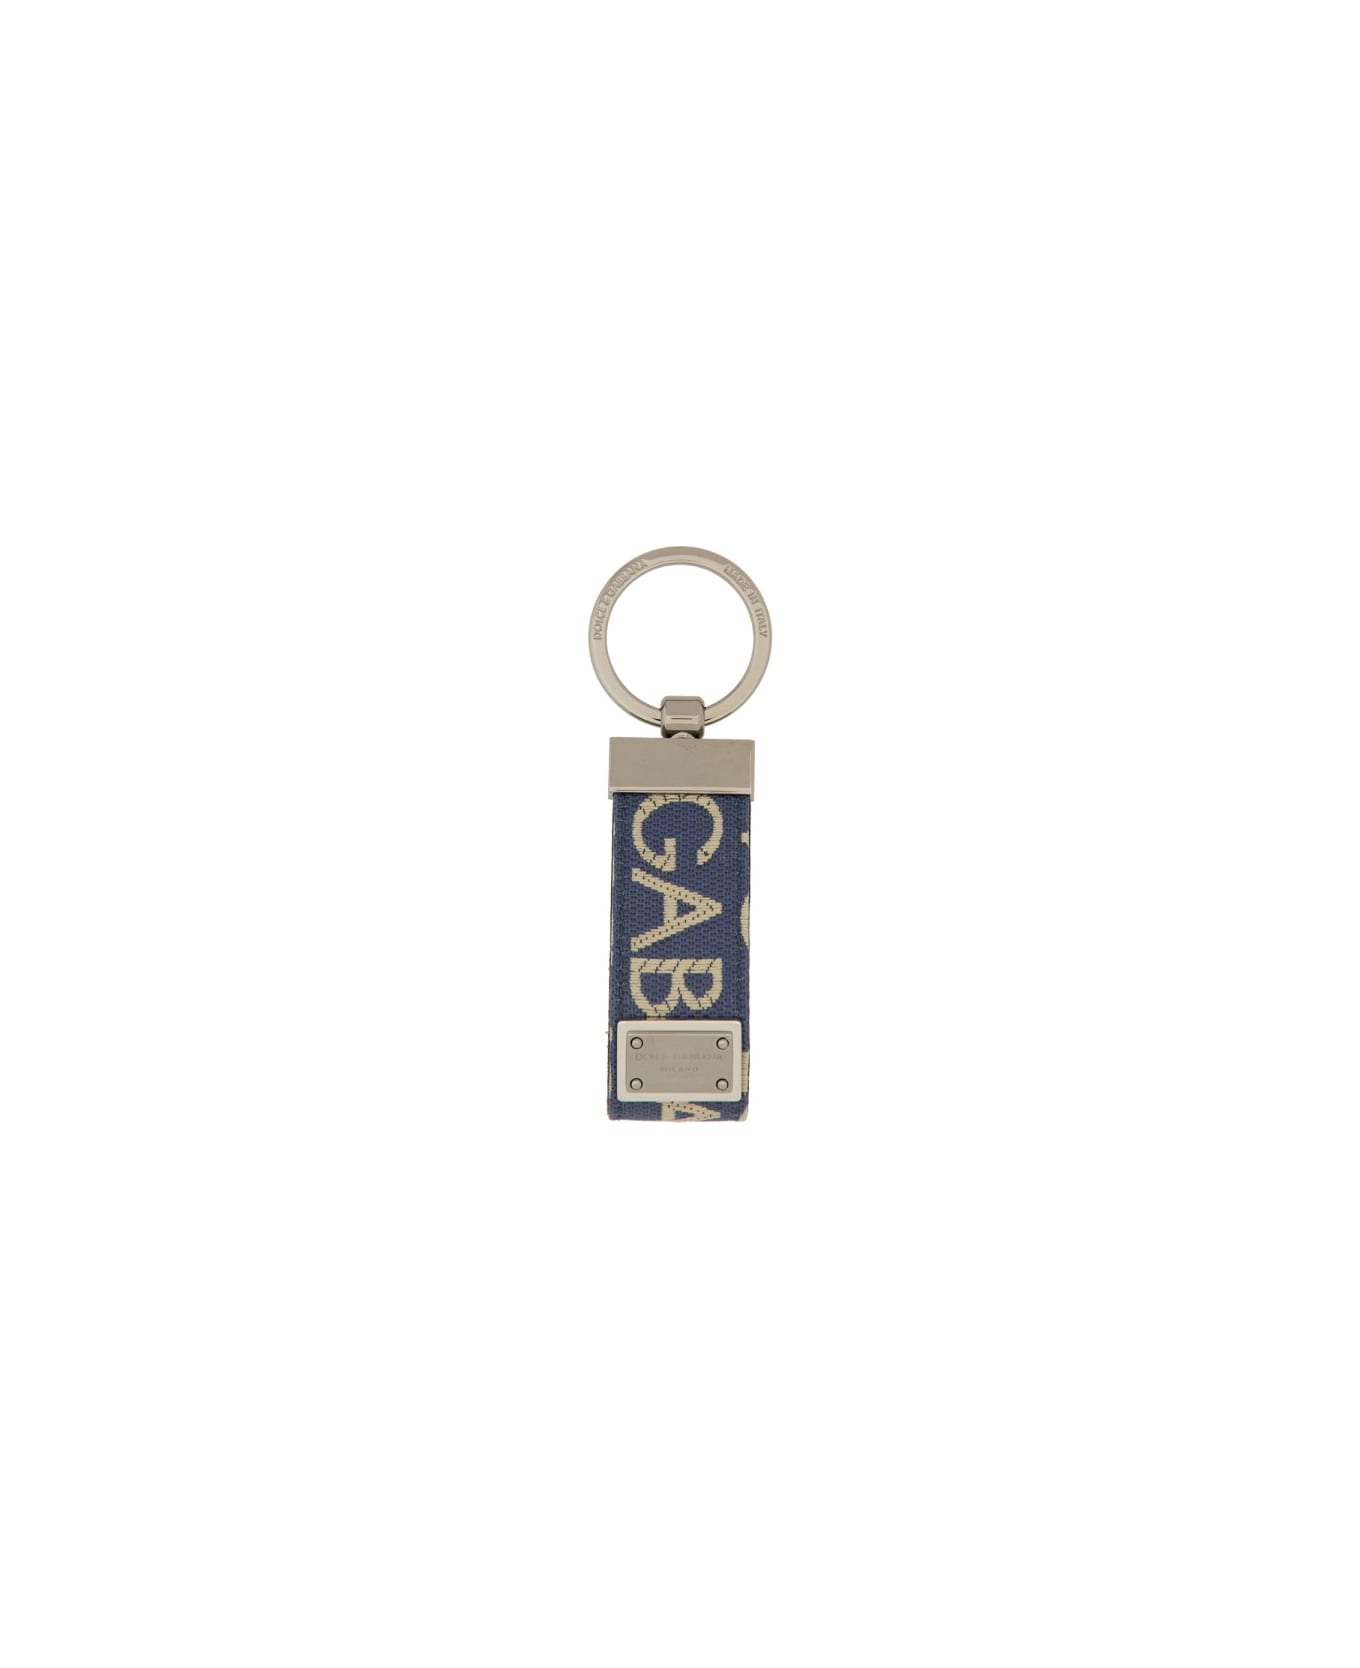 Dolce & Gabbana Keychain With Logoed Label - BLUE